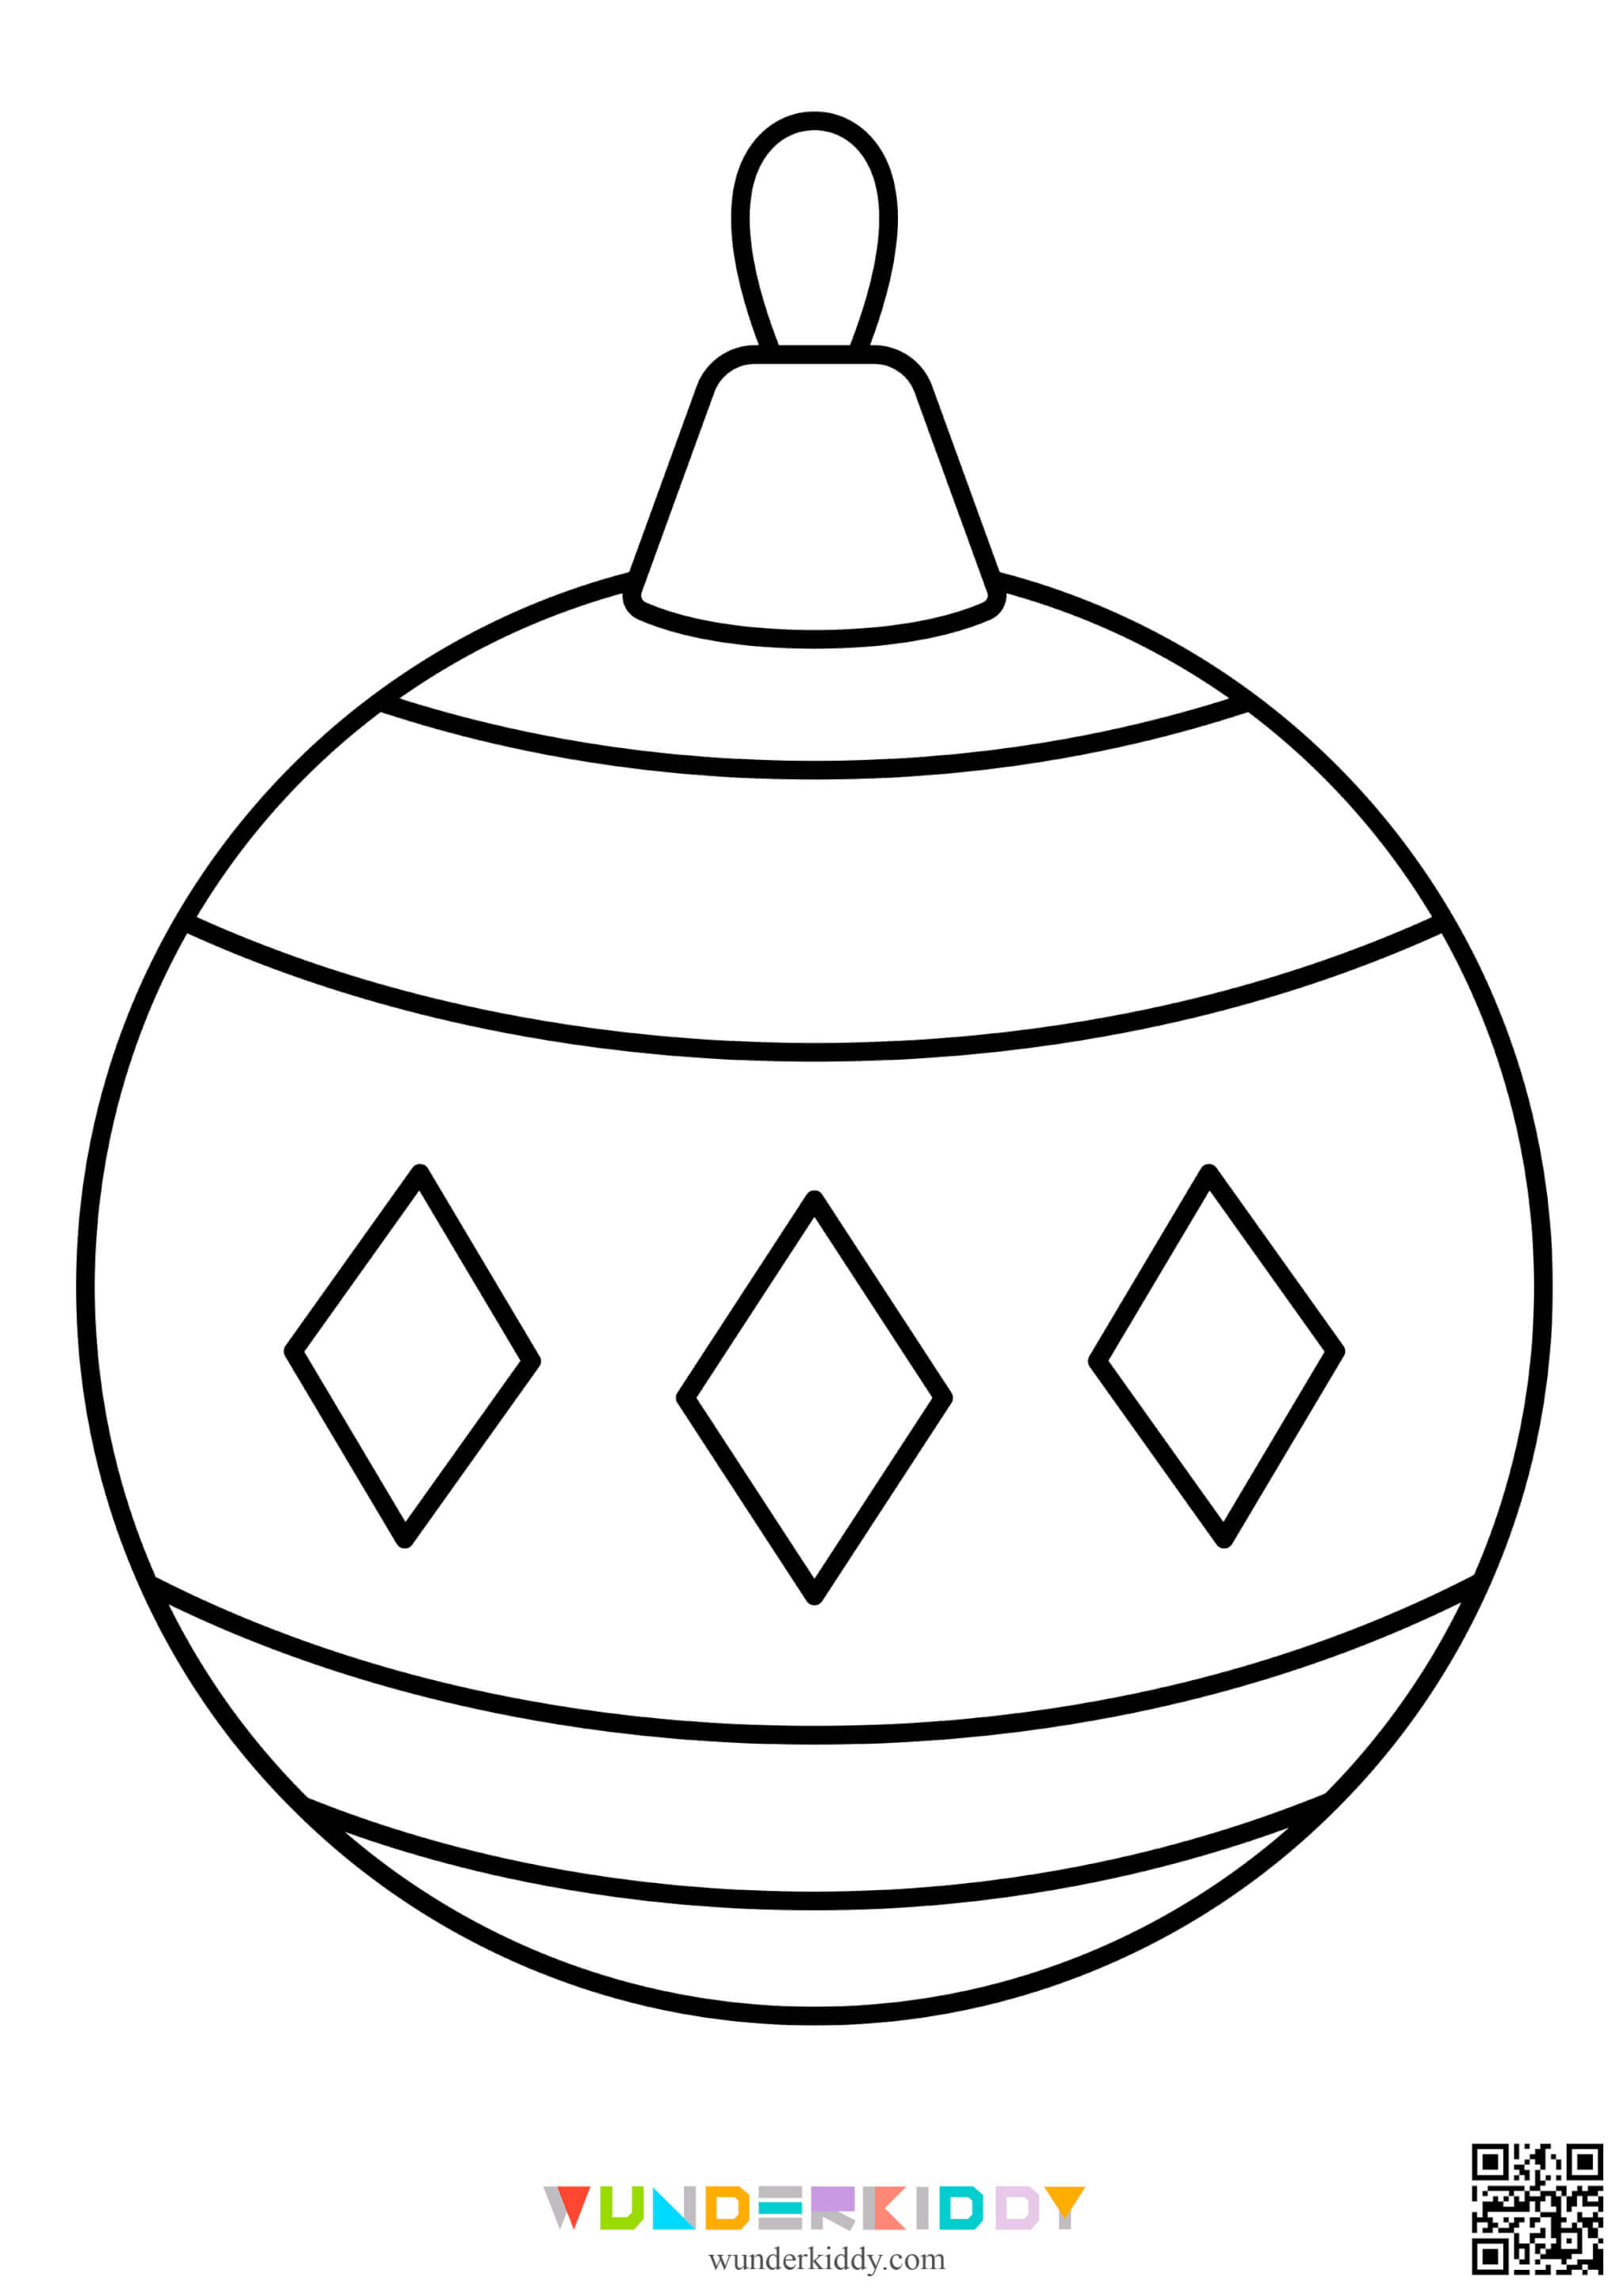 Christmas Ornament Coloring Pages - Image 2